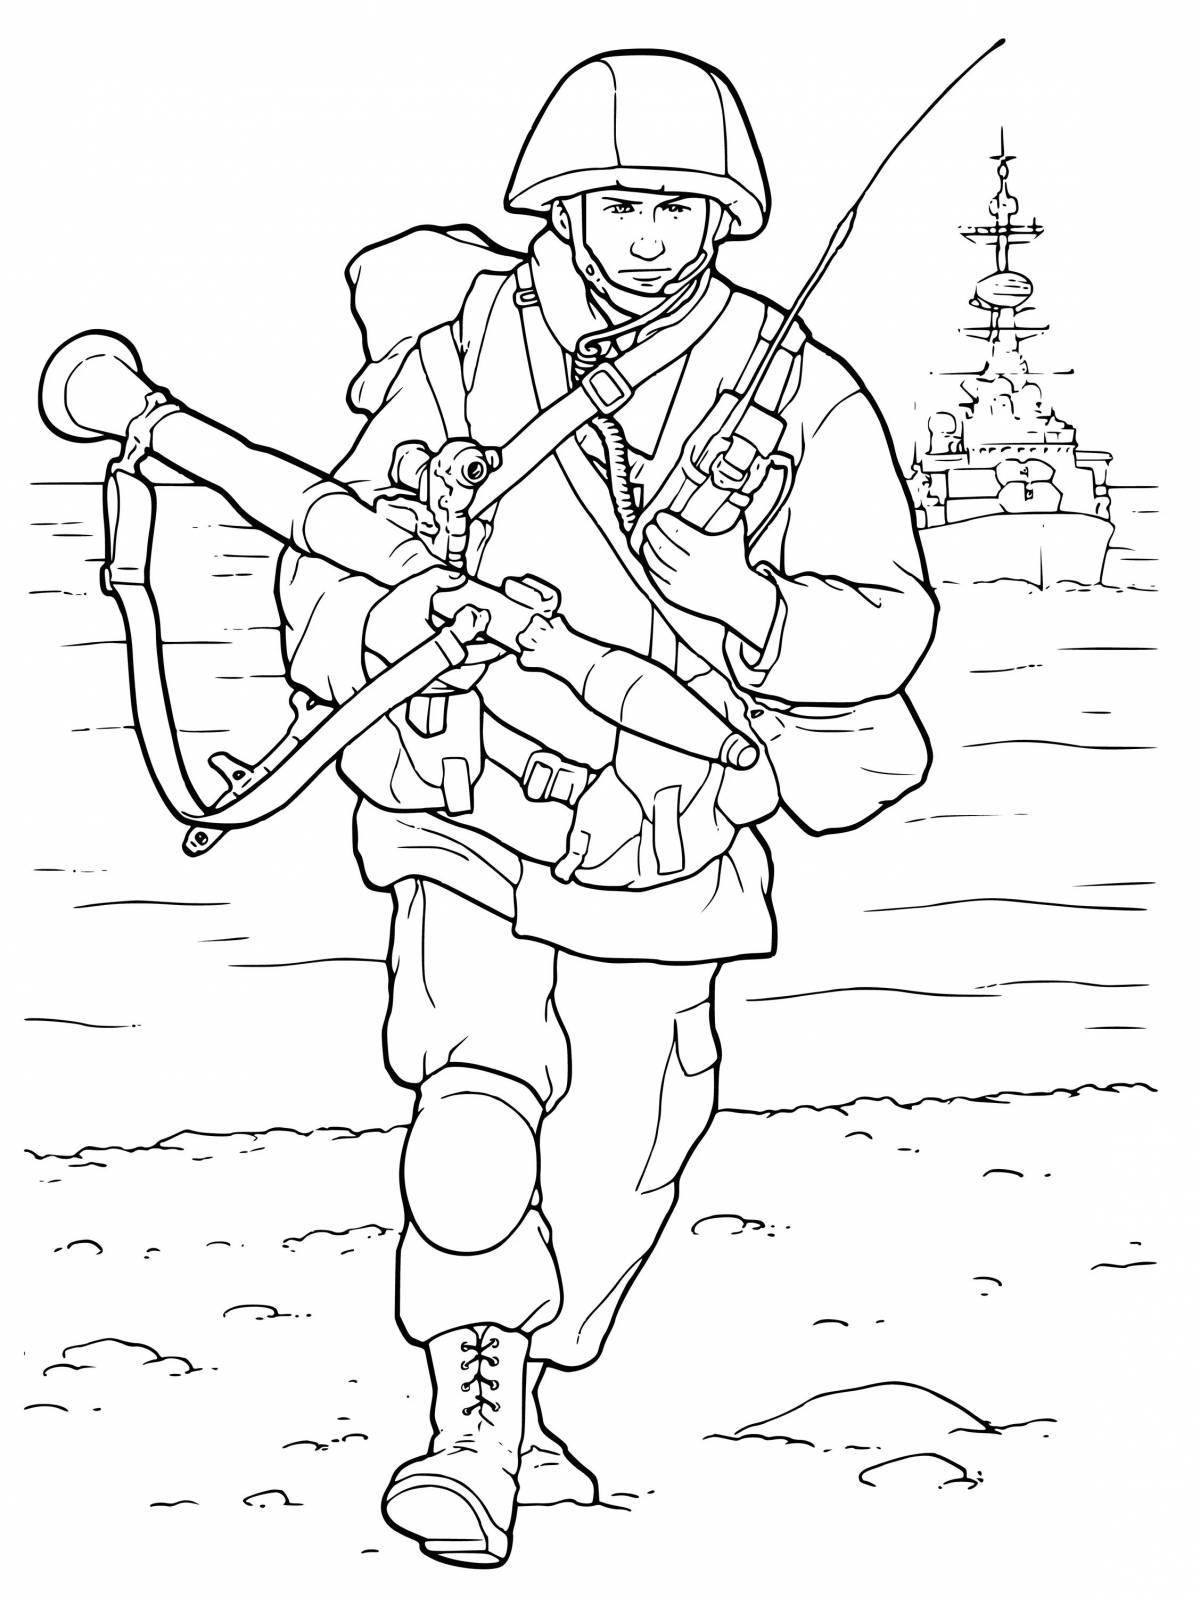 Cheerful modern soldier coloring for kids